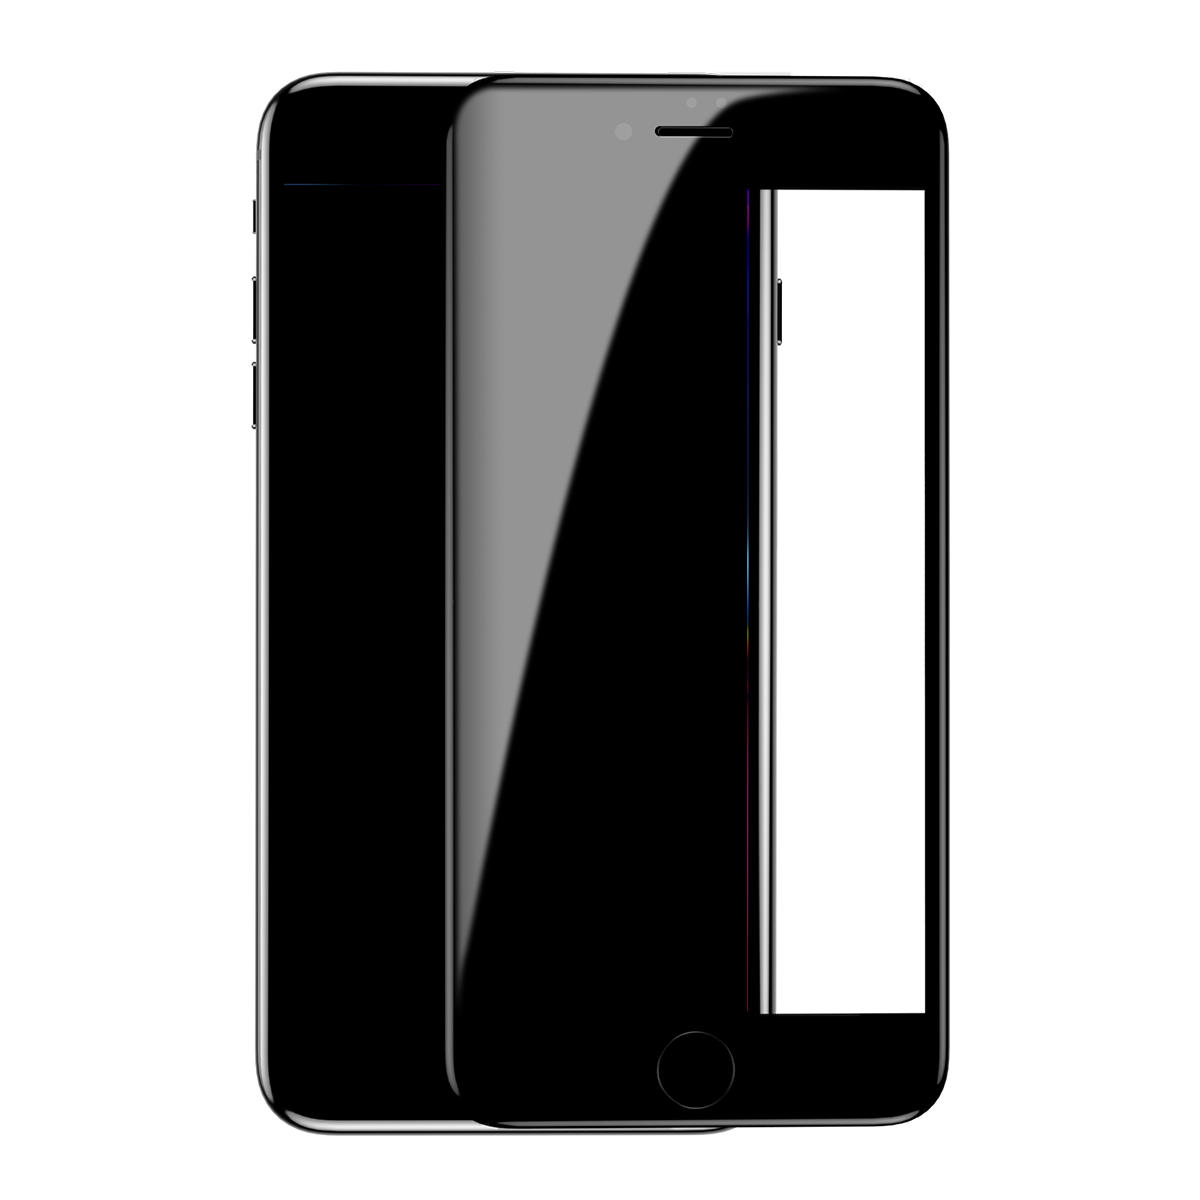 Baseus True 7D Curved Edge Clear Explosion Proof Tempered Glass Screen Protector For iPhone 7 Plus/8